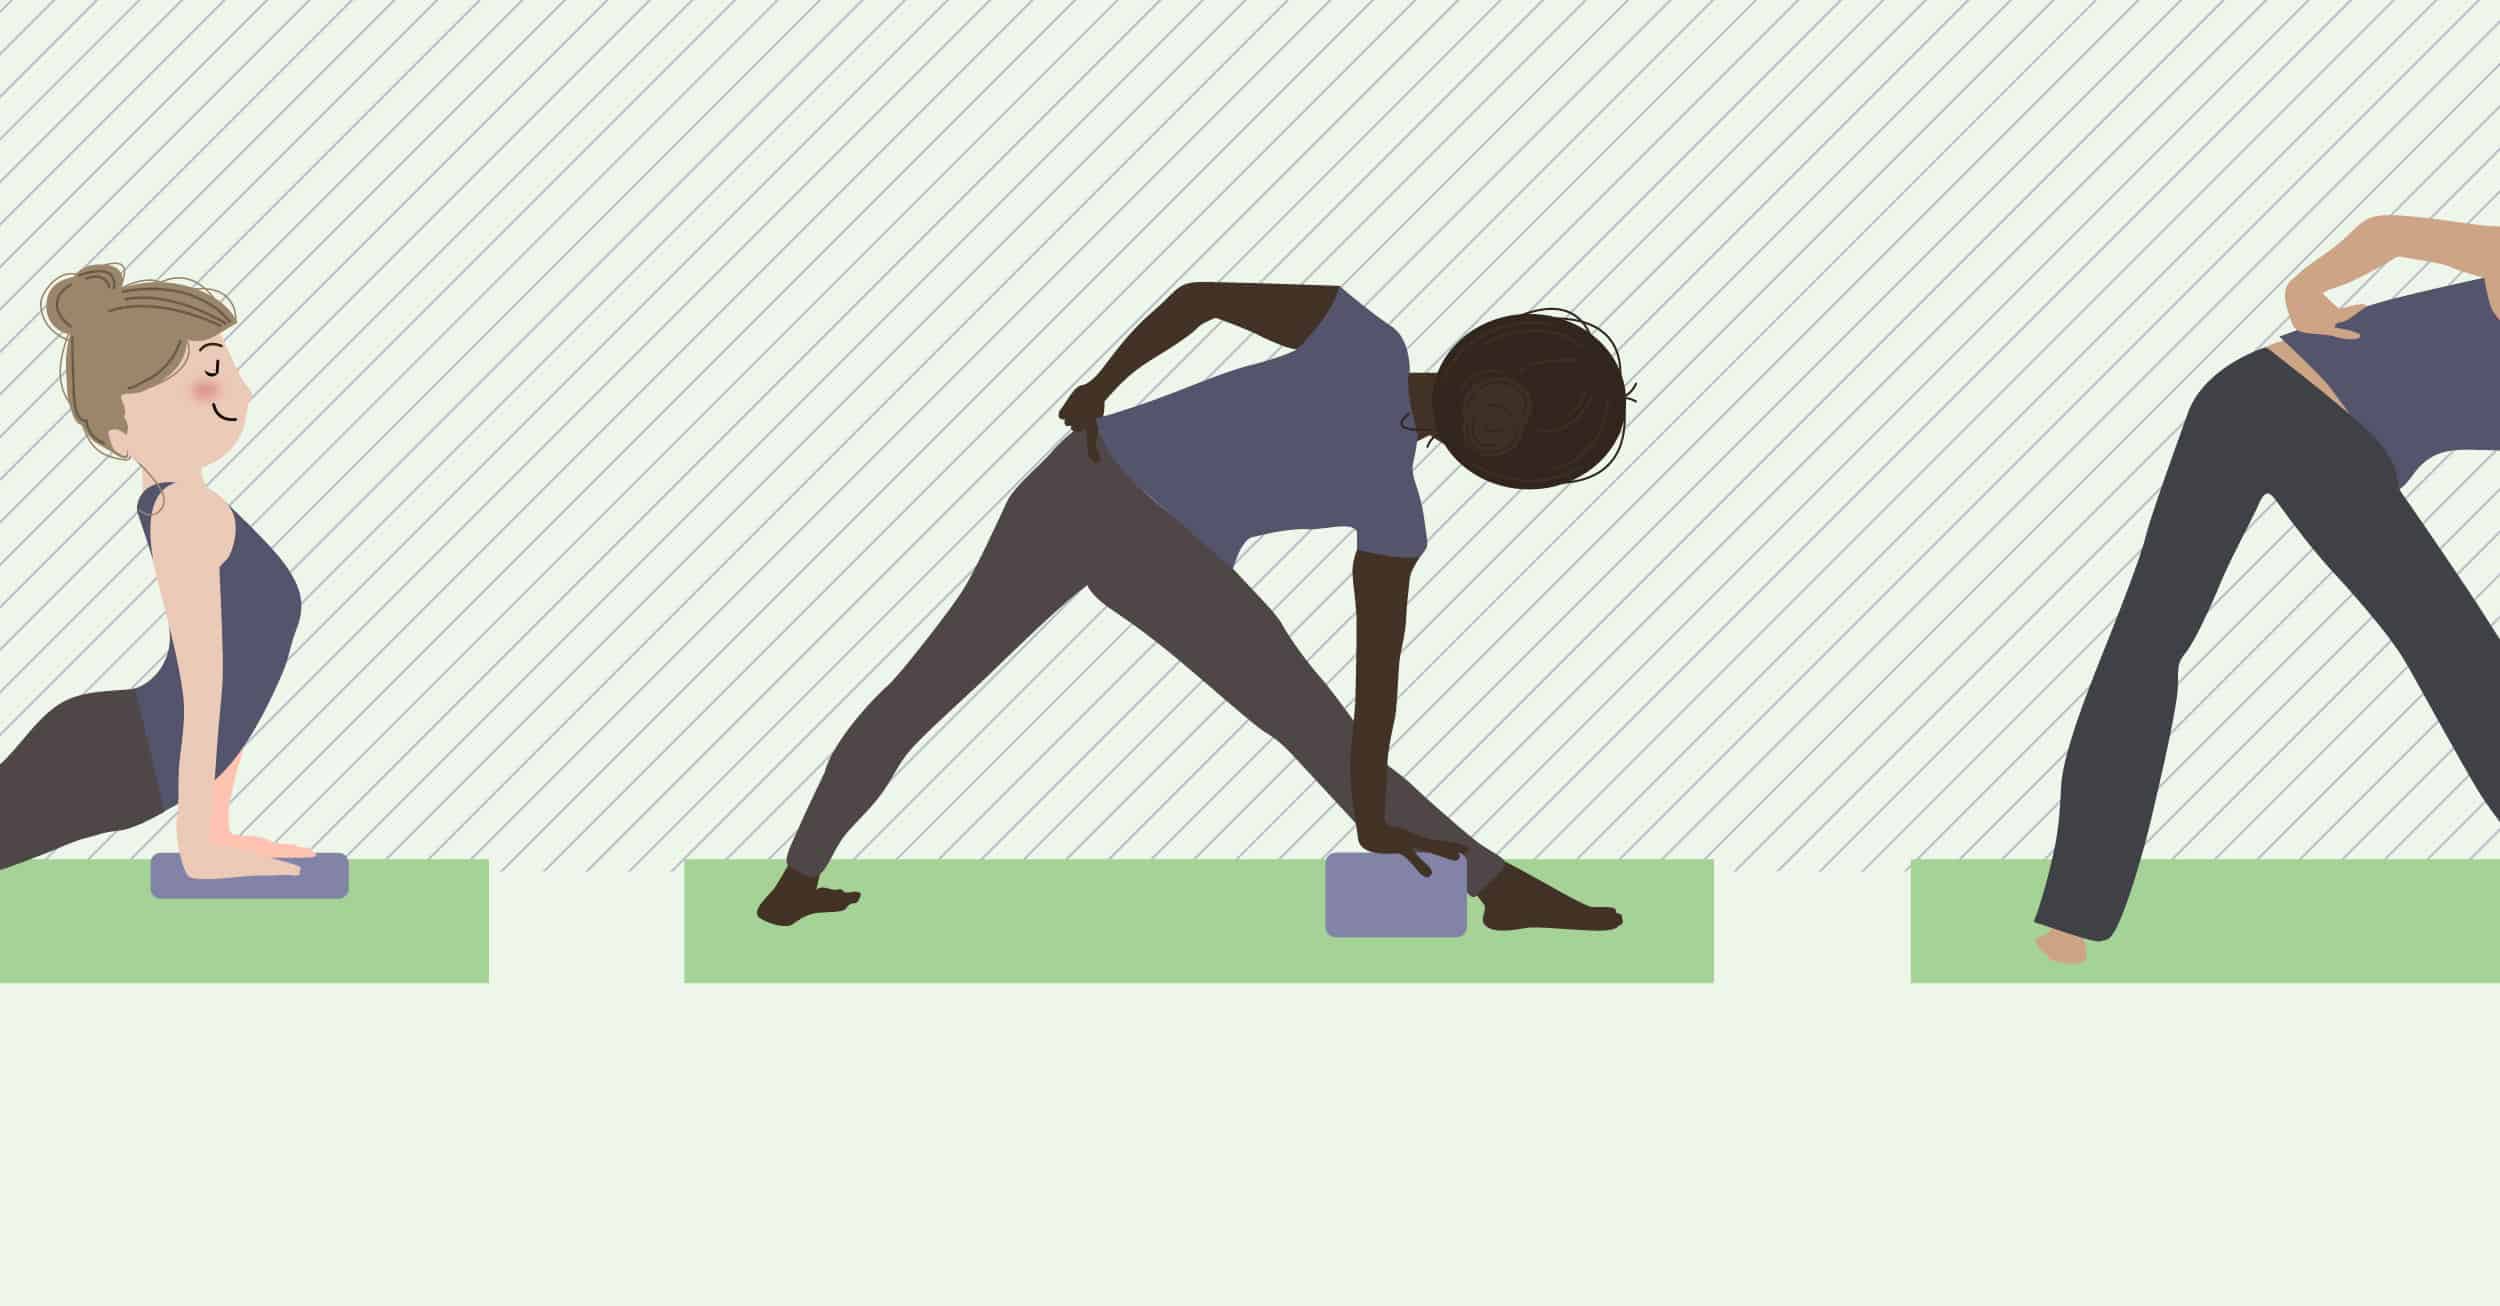 Short on Time? Try This All-in-One Yoga Pose! - Gaiam